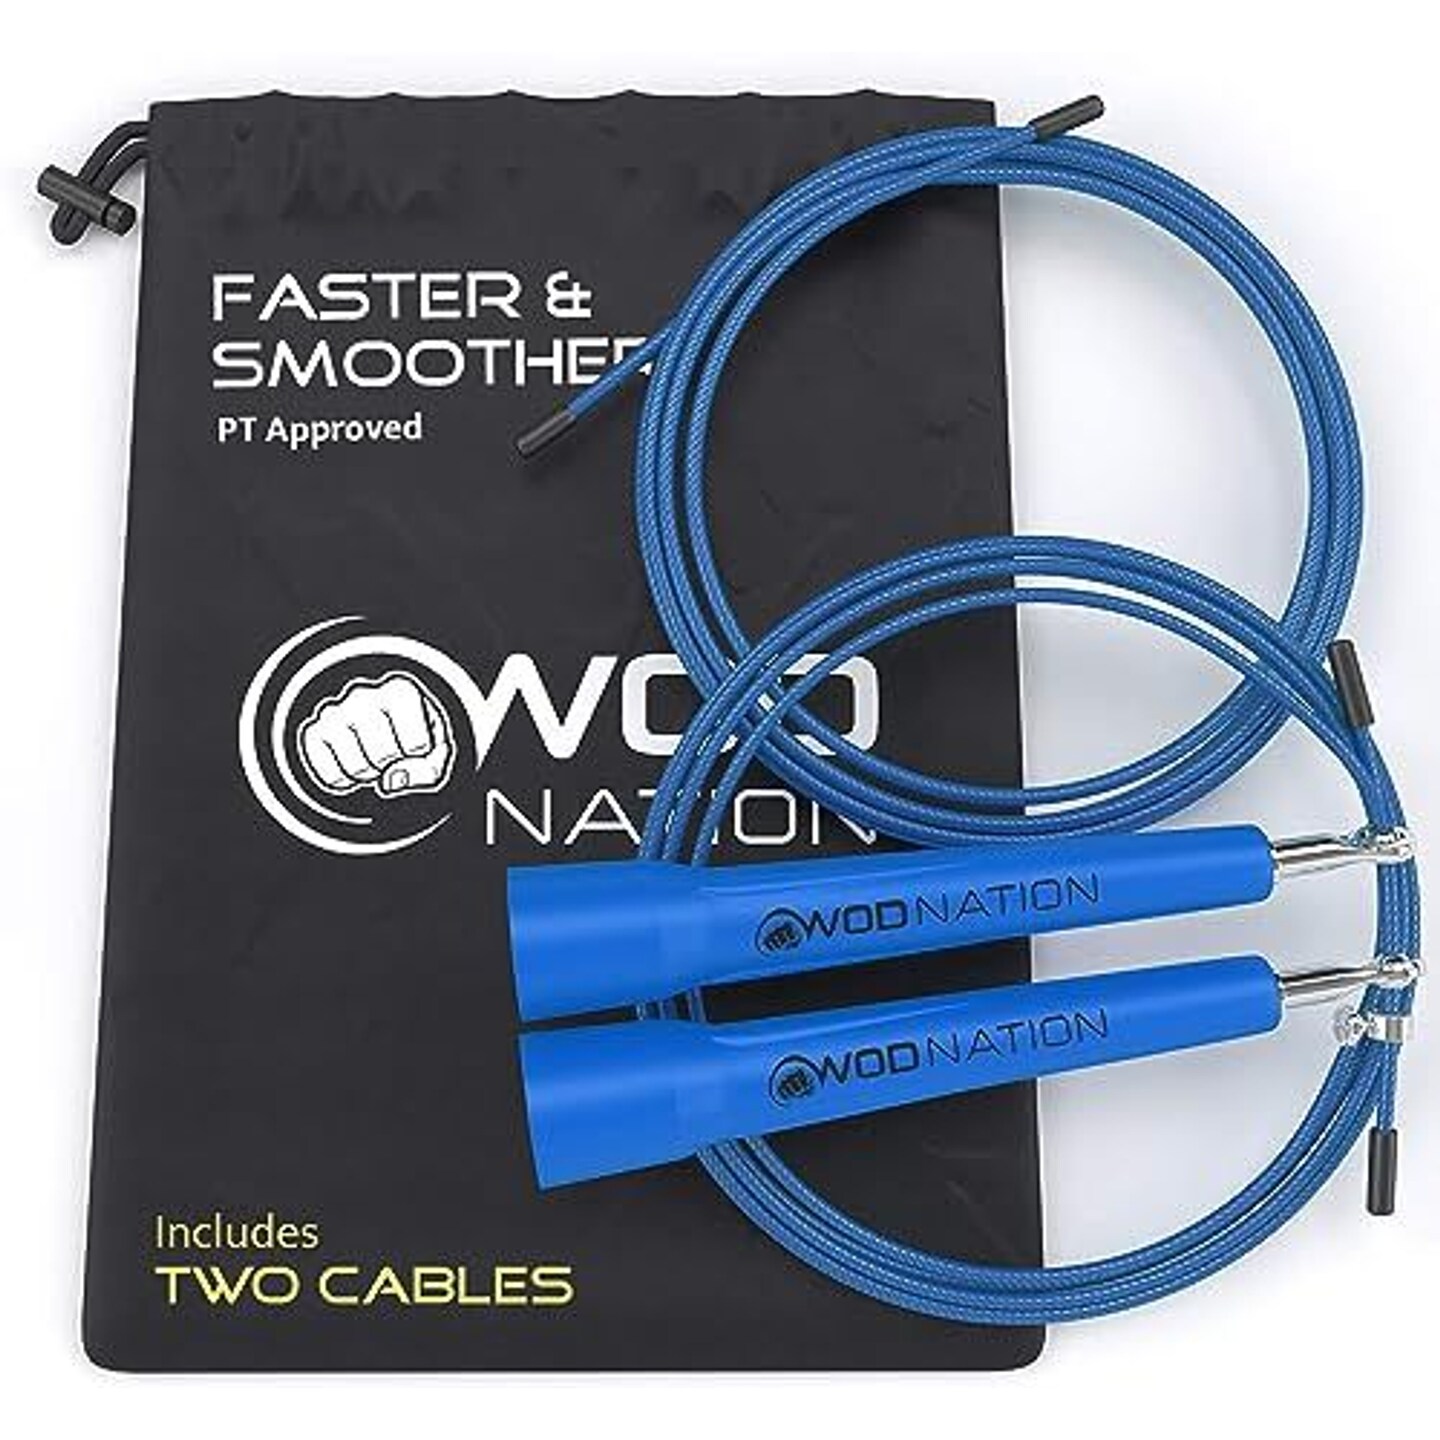 WOD Nation Adjustable Speed Jump Rope For Men, Women &#x26; Children - Blazing Fast Fitness Skipping Rope Perfect for Boxing, MMA, Endurance - Blue